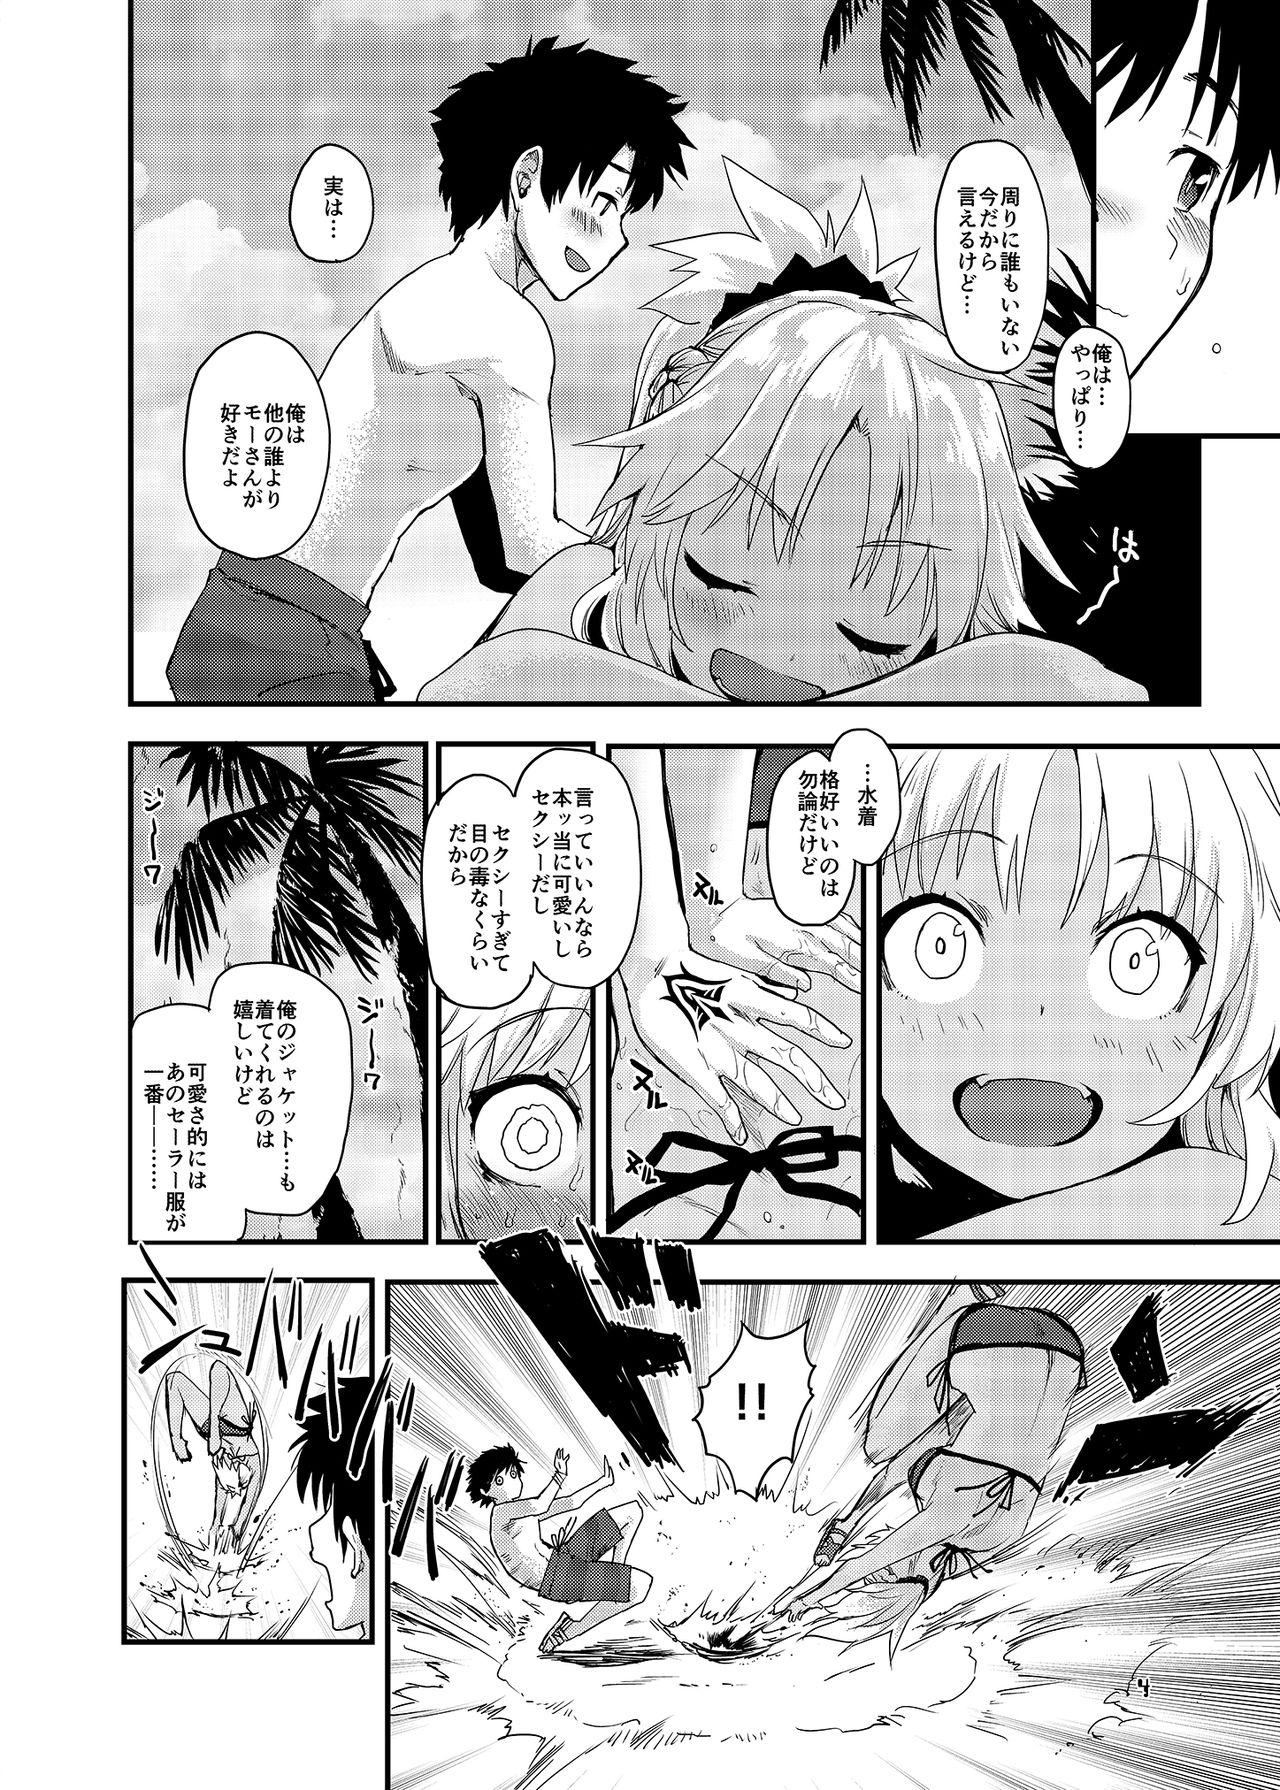 Marido With My Wild Honey - Fate grand order Sweet - Page 3